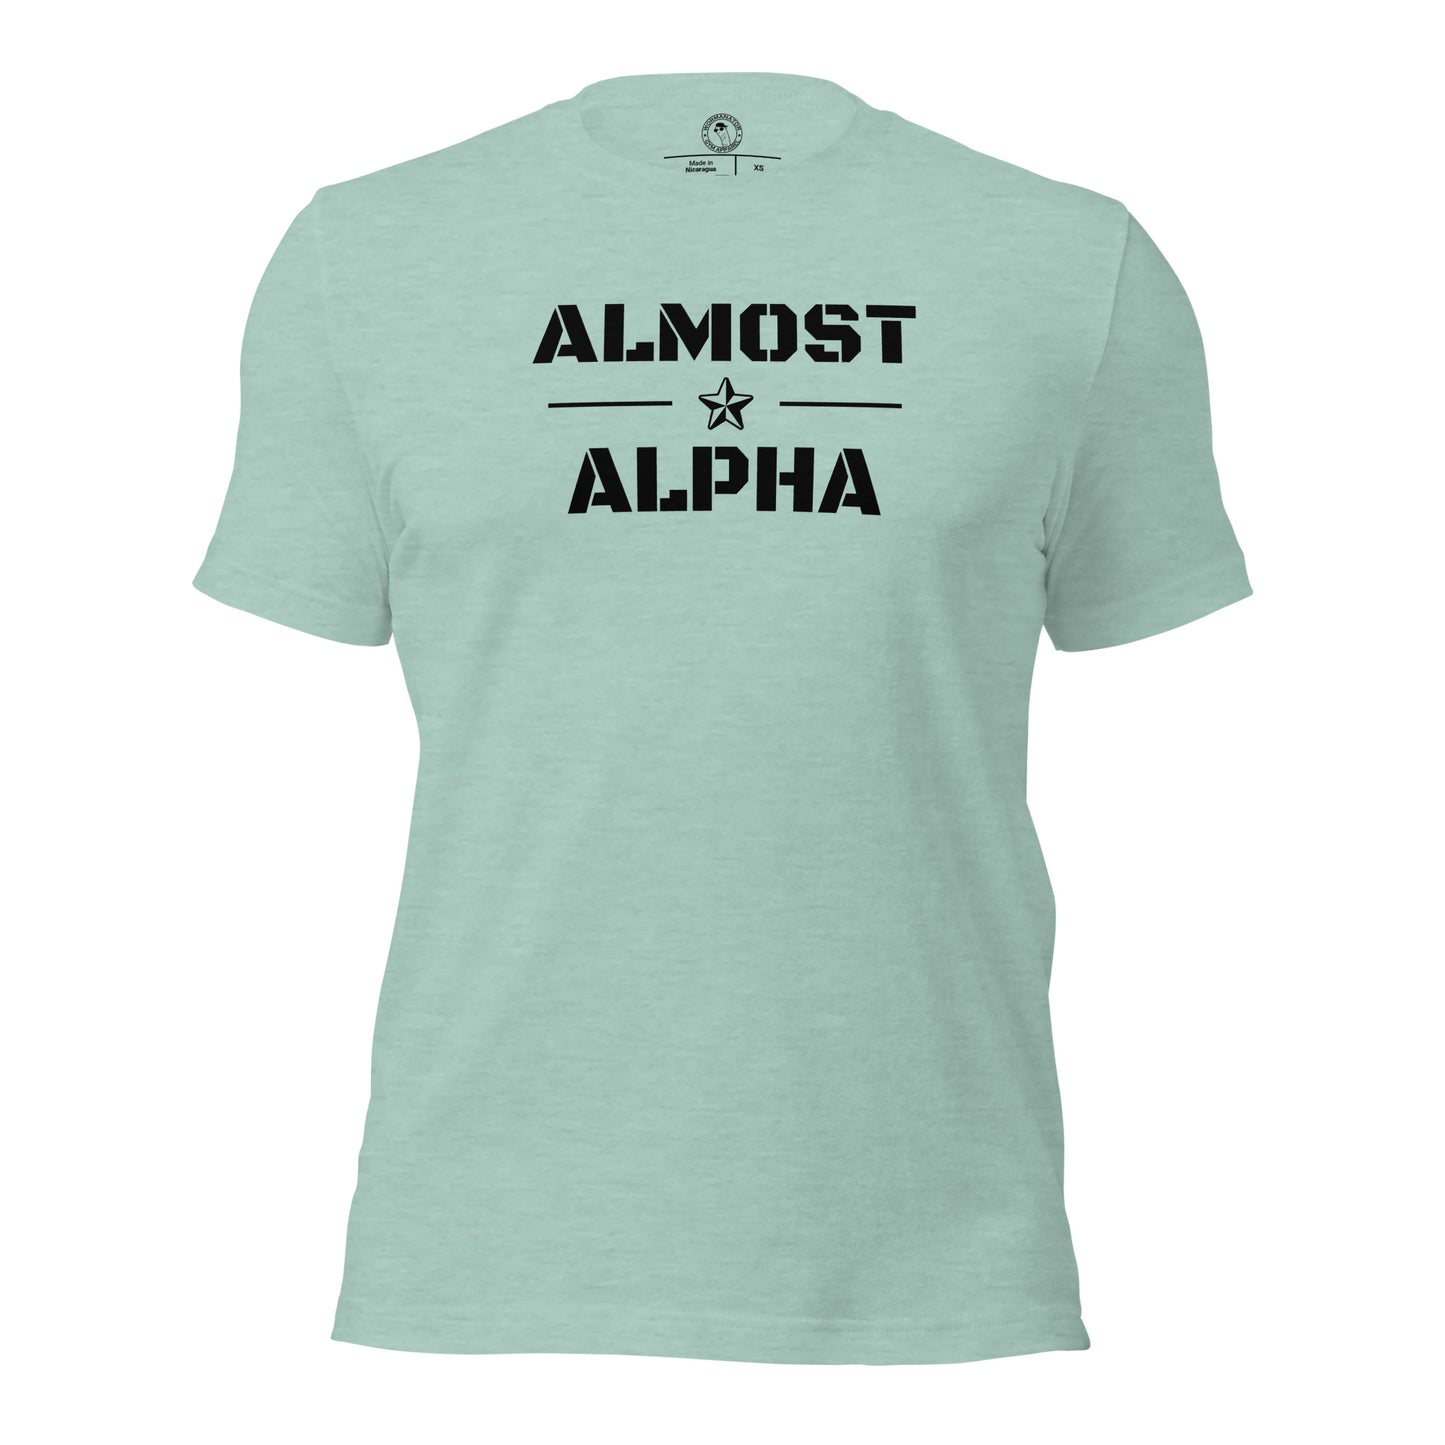 Almost Alpha Shirt in Heather Prism Dusty Blue